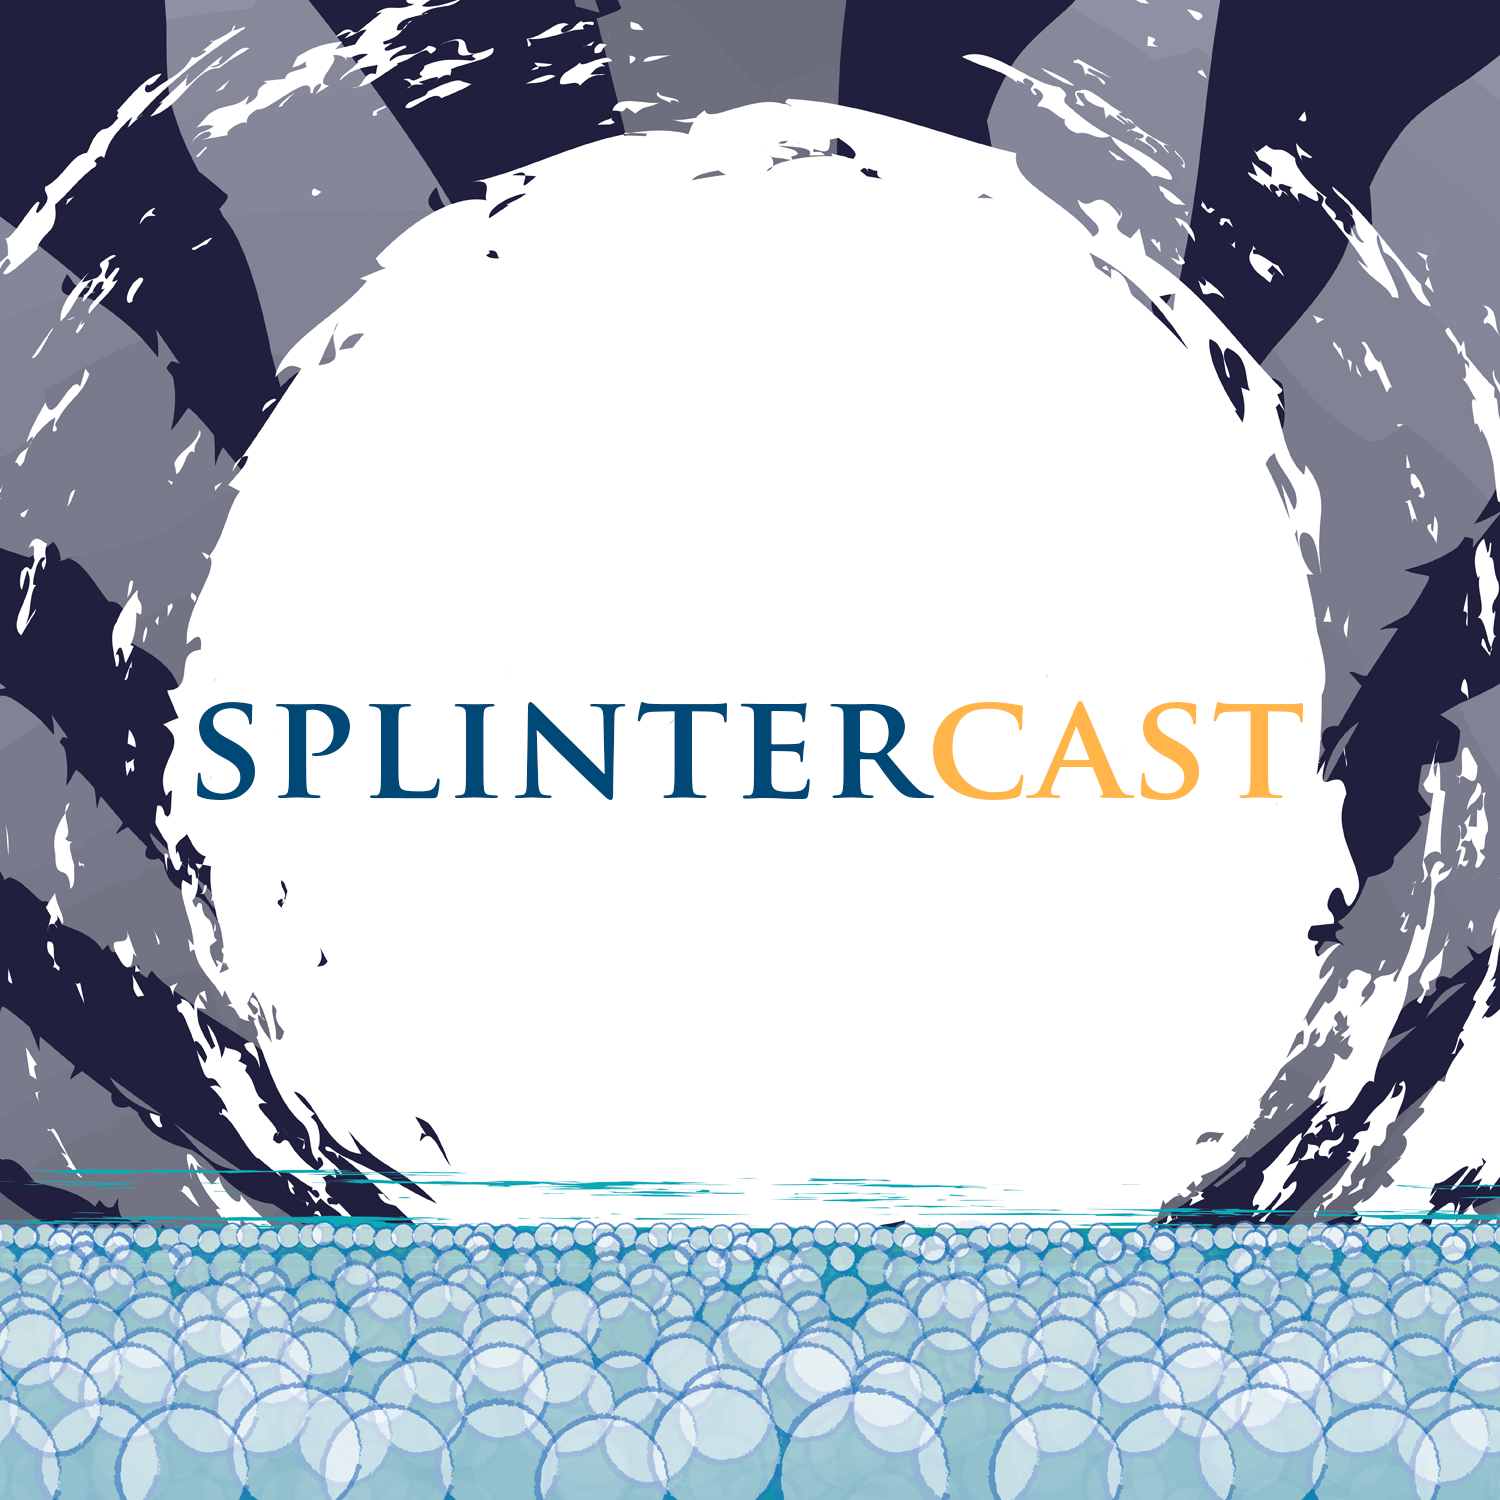 More information about "Splintercast: House of the Dragon"